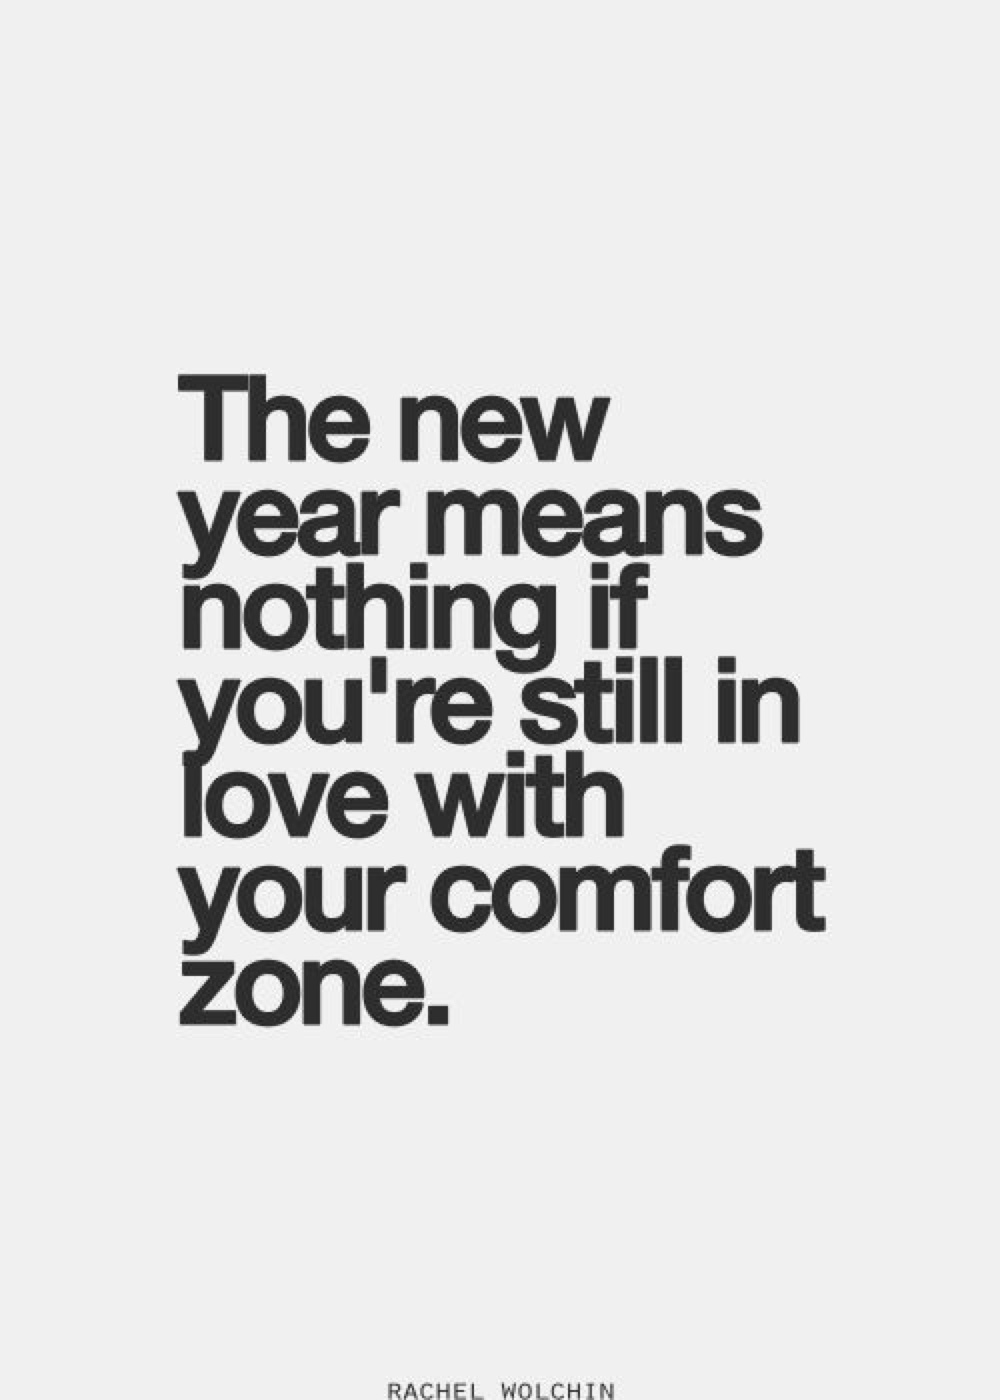 The new year means nothing if you’re still in love with your comfort zone.